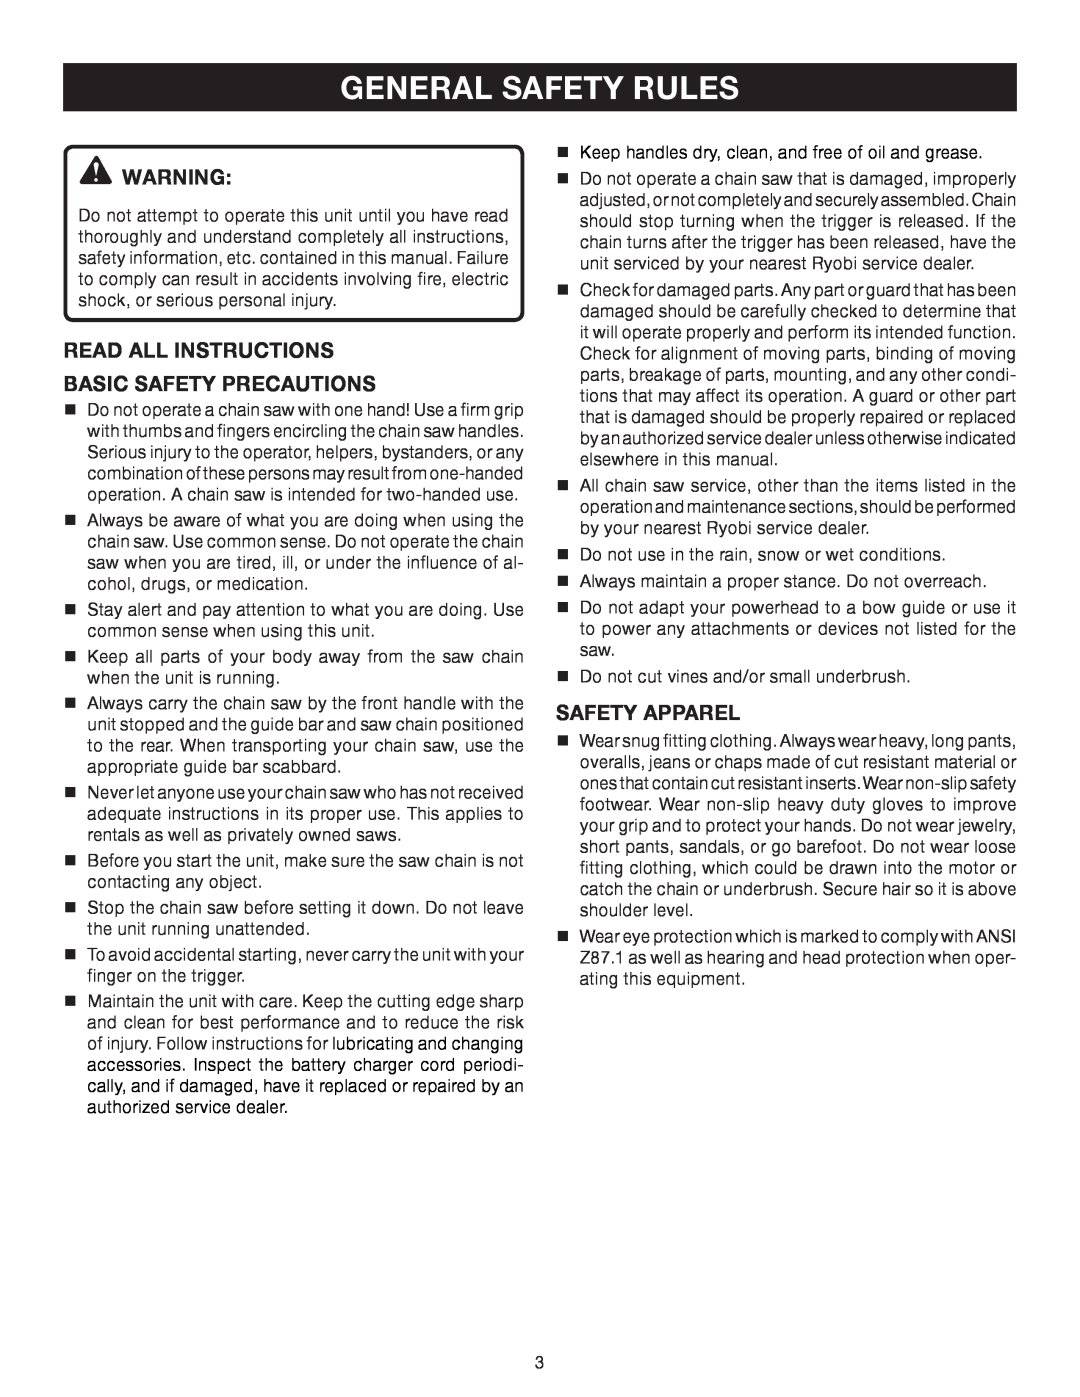 Ryobi P540B manual general SAFETY RULES, READ ALL INSTRUCTIONS Basic Safety Precautions, Safety Apparel 